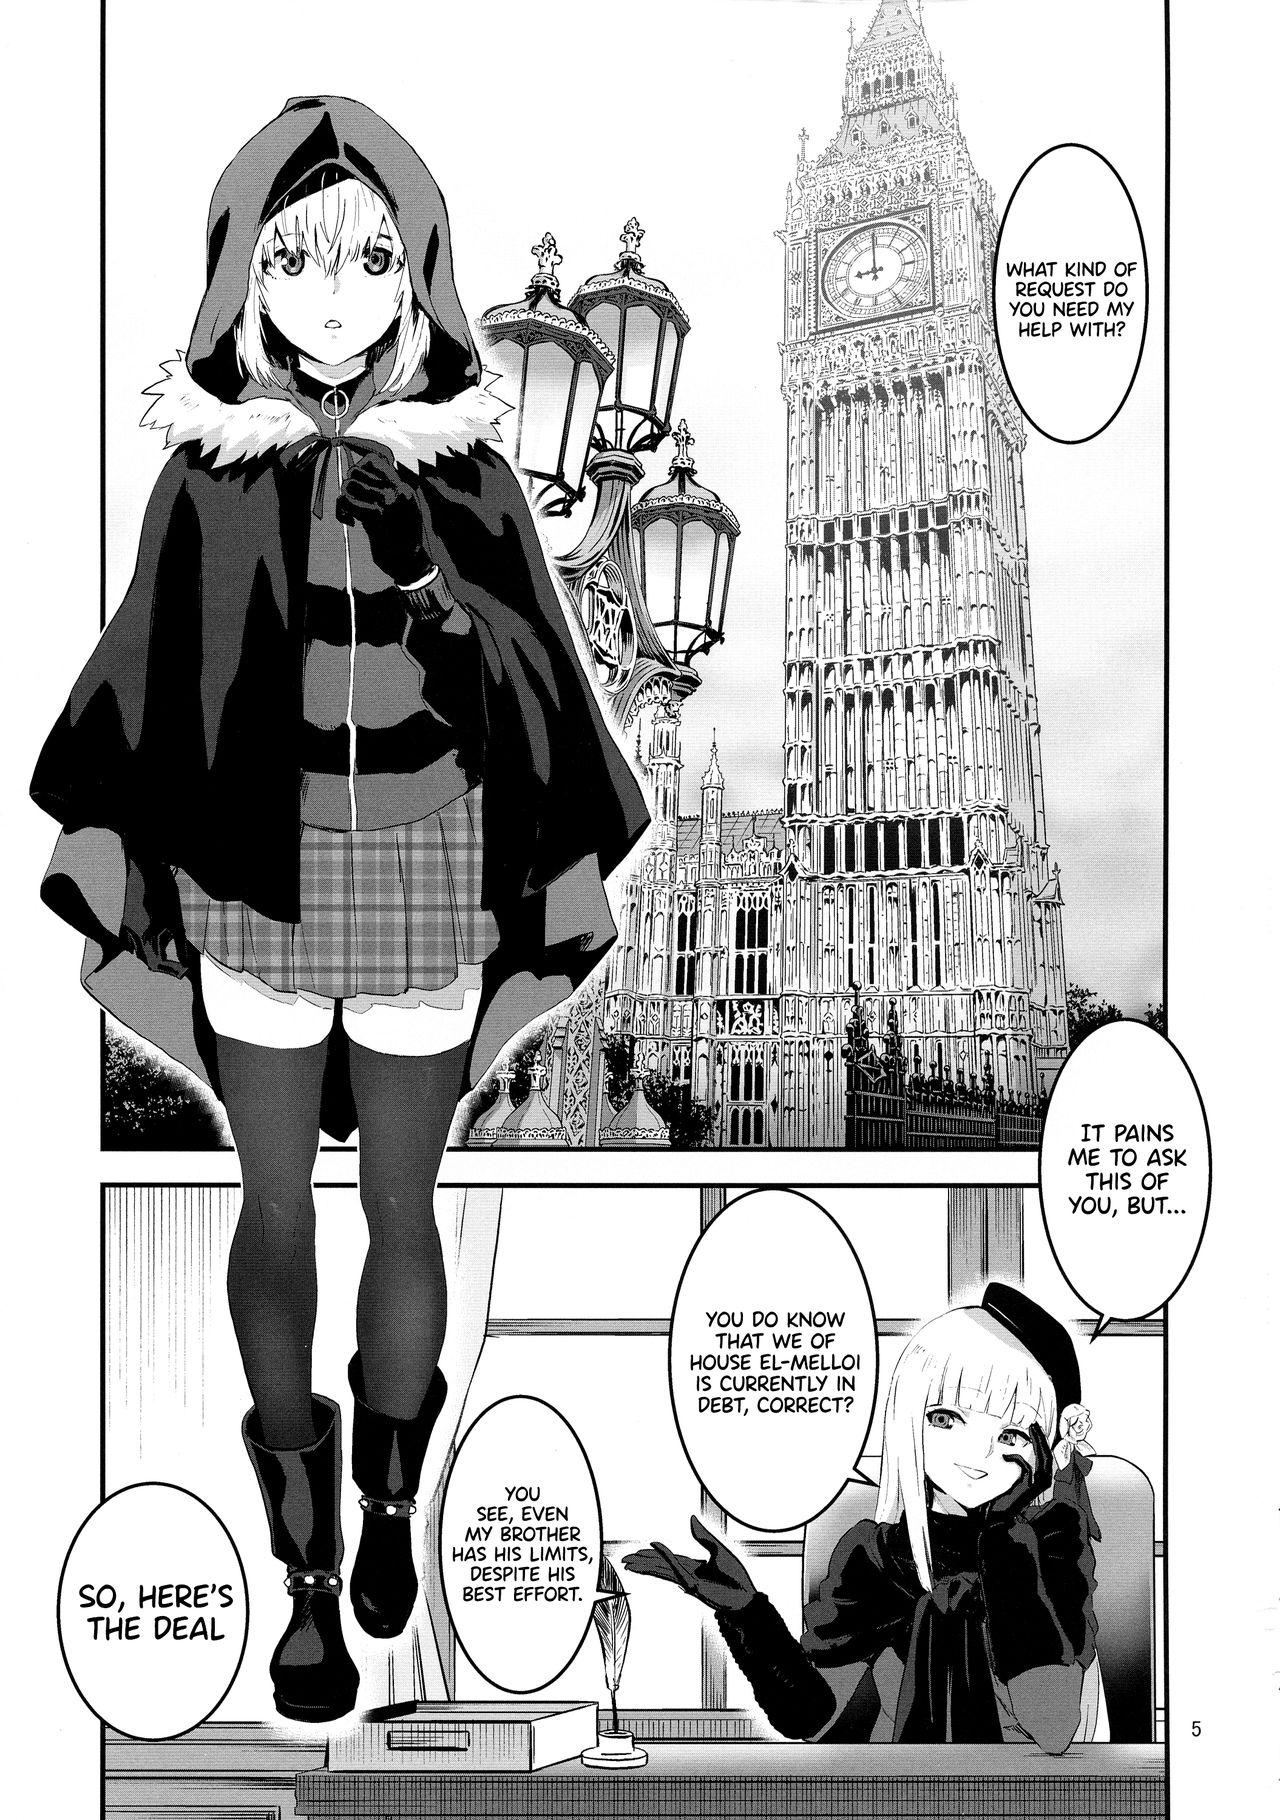 Flash Taking Advantage of Gray-chan Weakness, We Graduated from our Virginity. - Lord el-melloi ii sei no jikenbo Teen Blowjob - Page 5